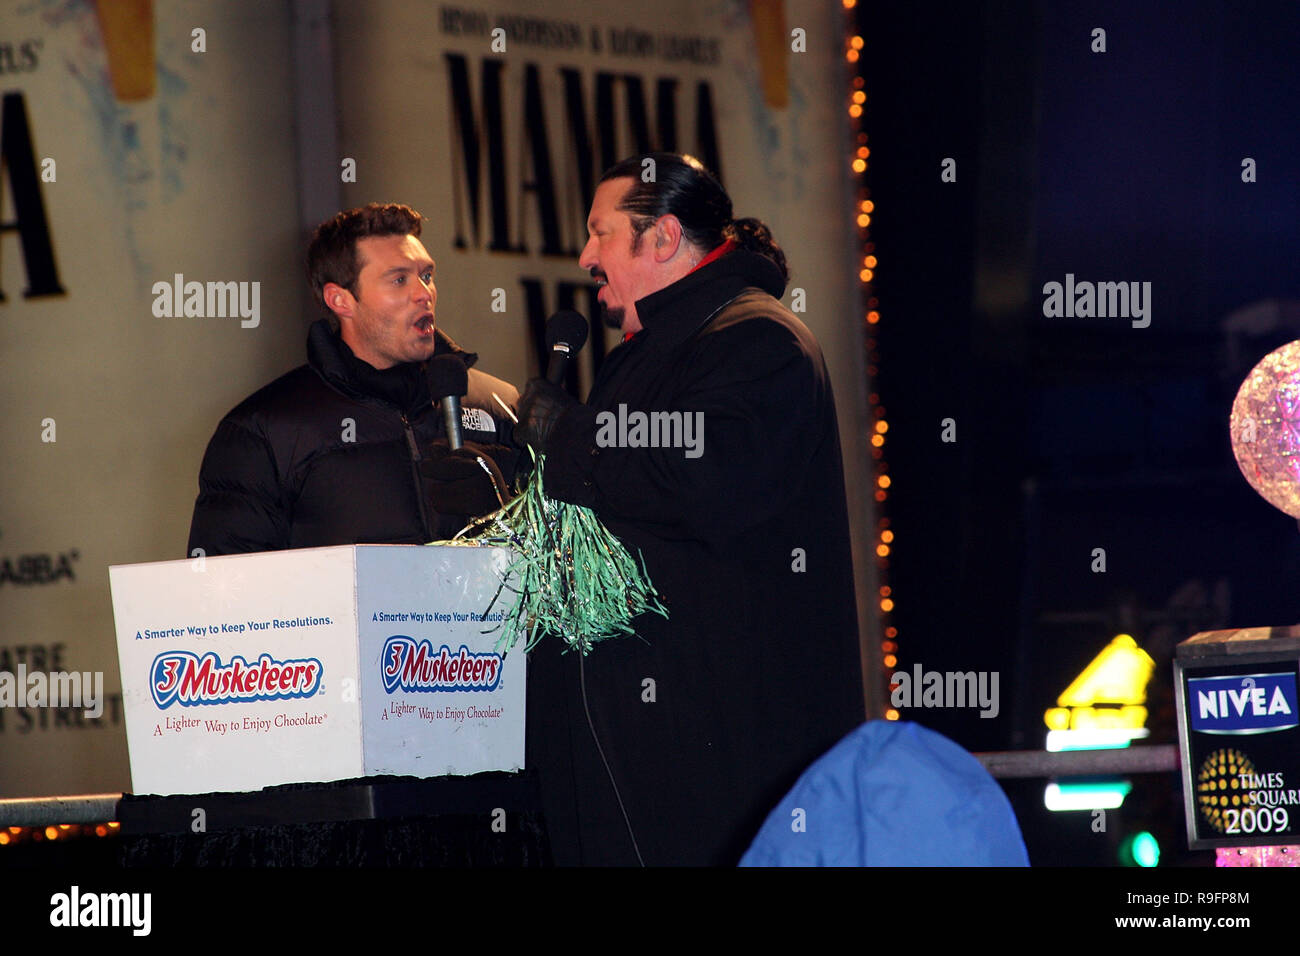 NEW YORK - DECEMBER 31:  Ryan Seacrest (L) attends the ceremony to lower the New Years Eve ball in Times Square on December 31, 2008 in New York City.  (Photo by Steve Mack/S.D. Mack Pictures) Stock Photo